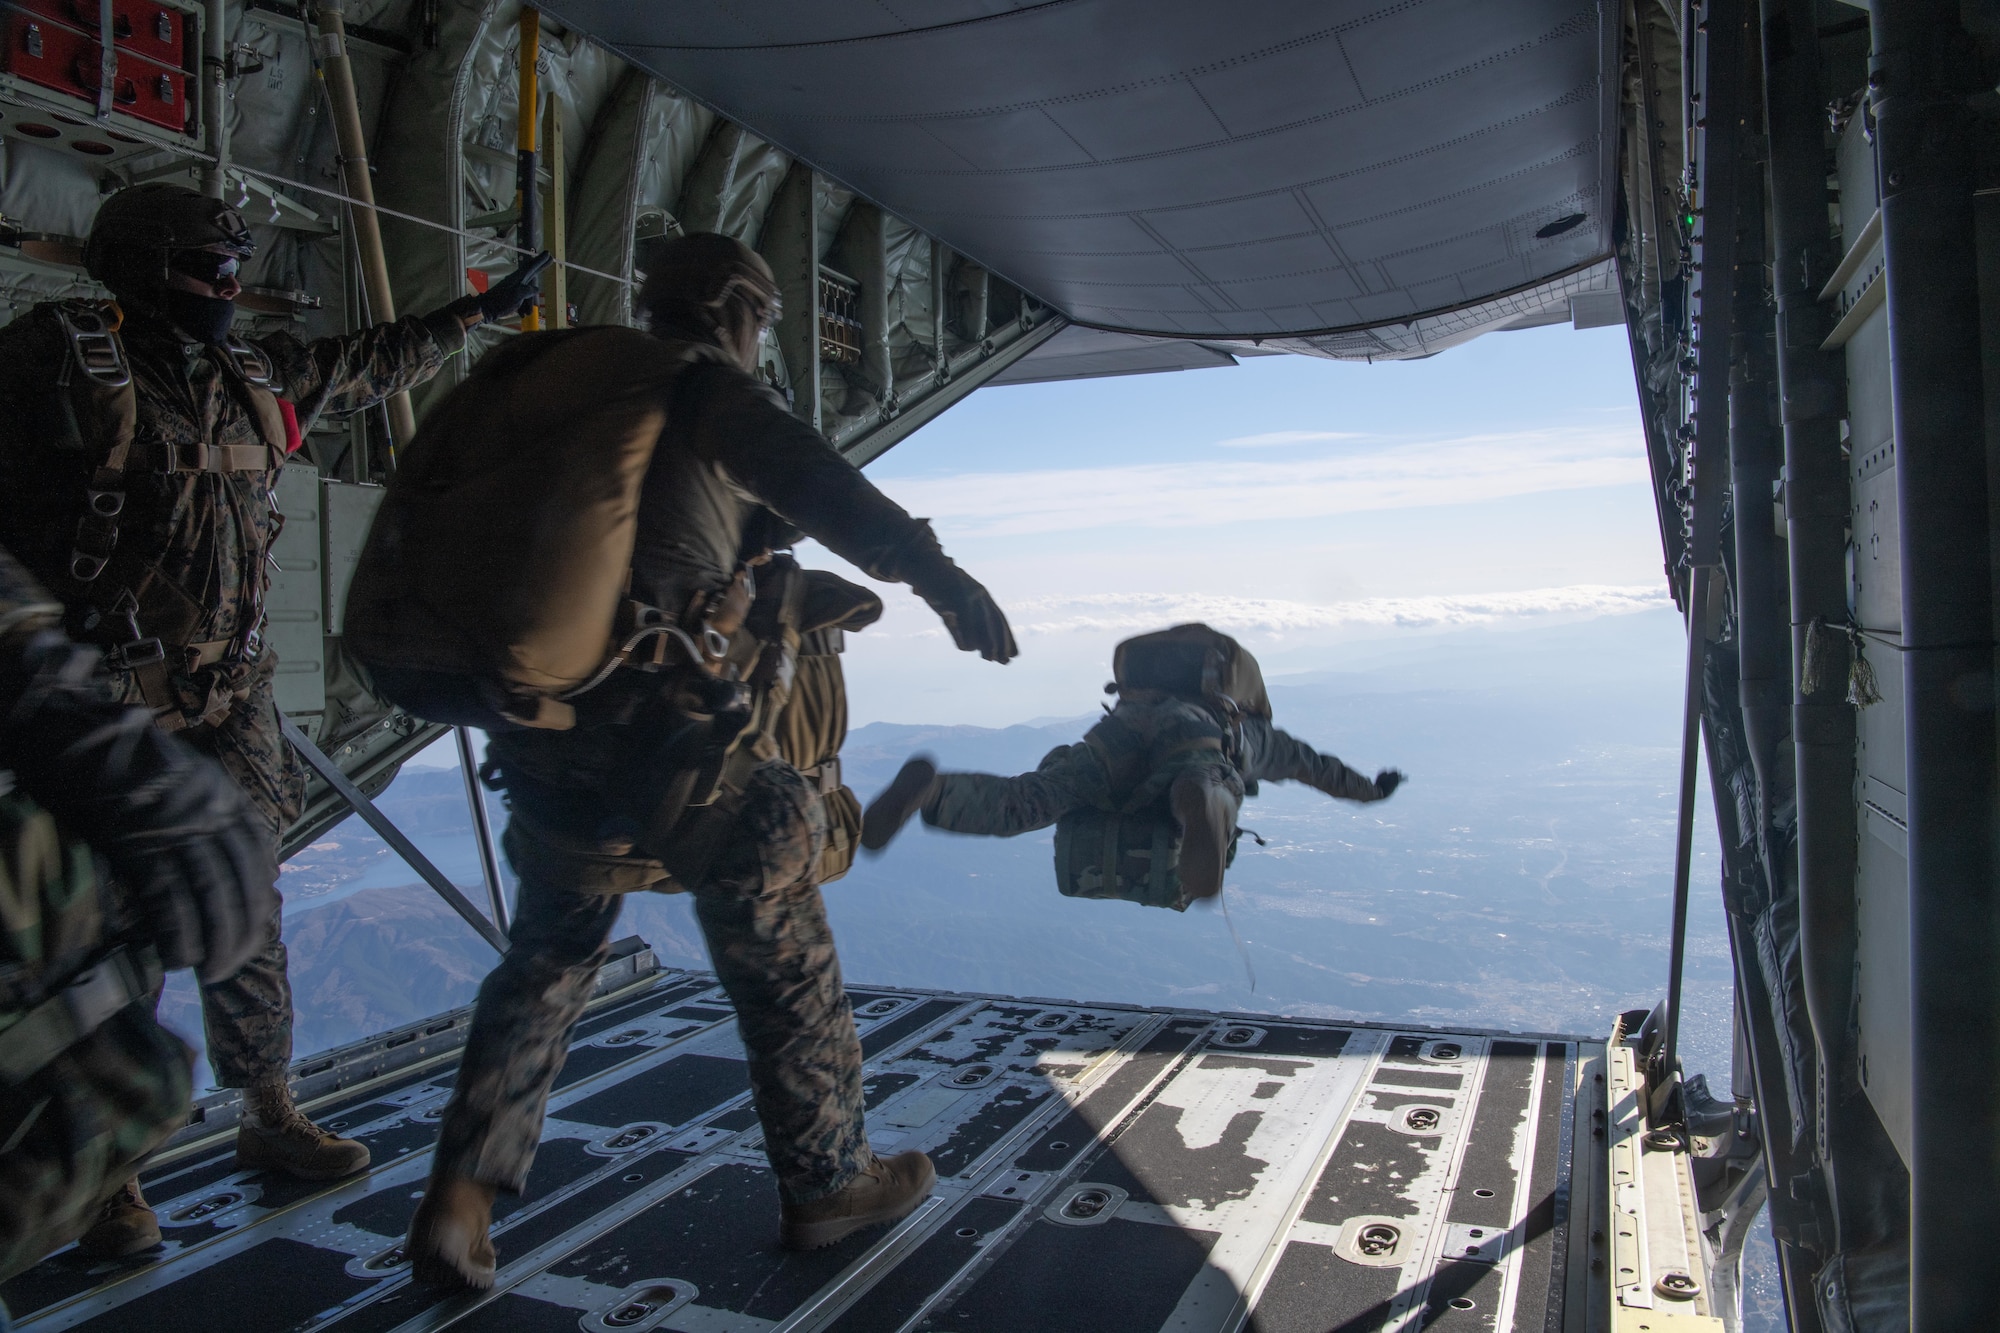 Marines assigned to the 3rd Reconnaissance Battalion, 3rd Marine Division, jump from the loading dock of a 36th Airlift Squadron C-130J Super Hercules during high altitude, low opening (HALO) parachute jumps at Yokota Air Base, Japan, Dec. 17, 2021